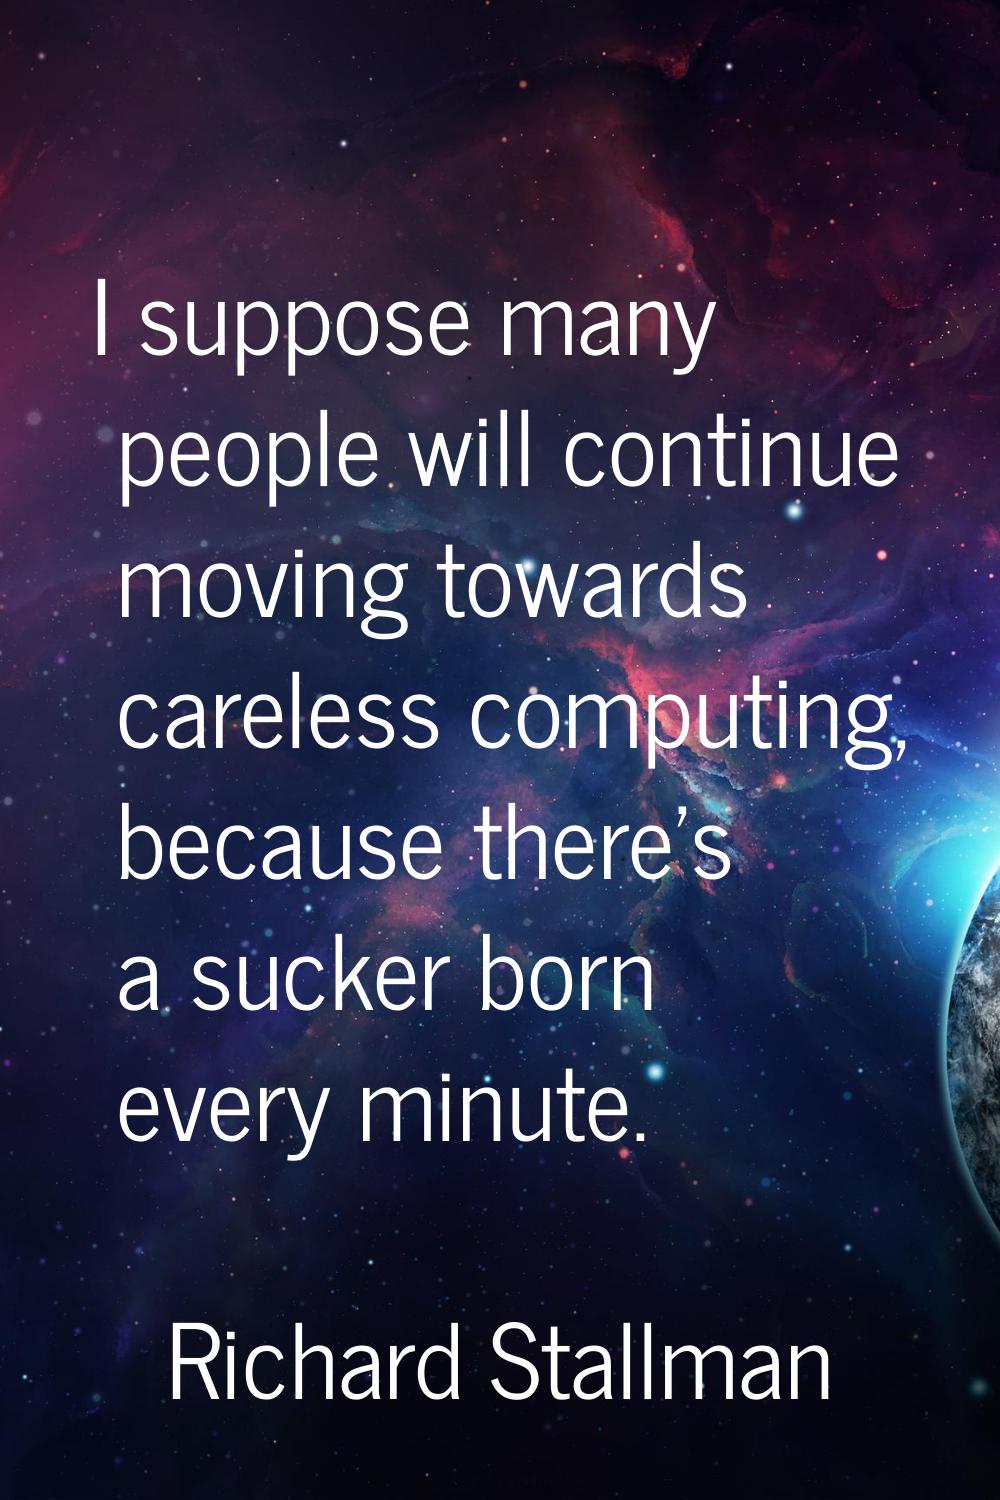 I suppose many people will continue moving towards careless computing, because there's a sucker bor